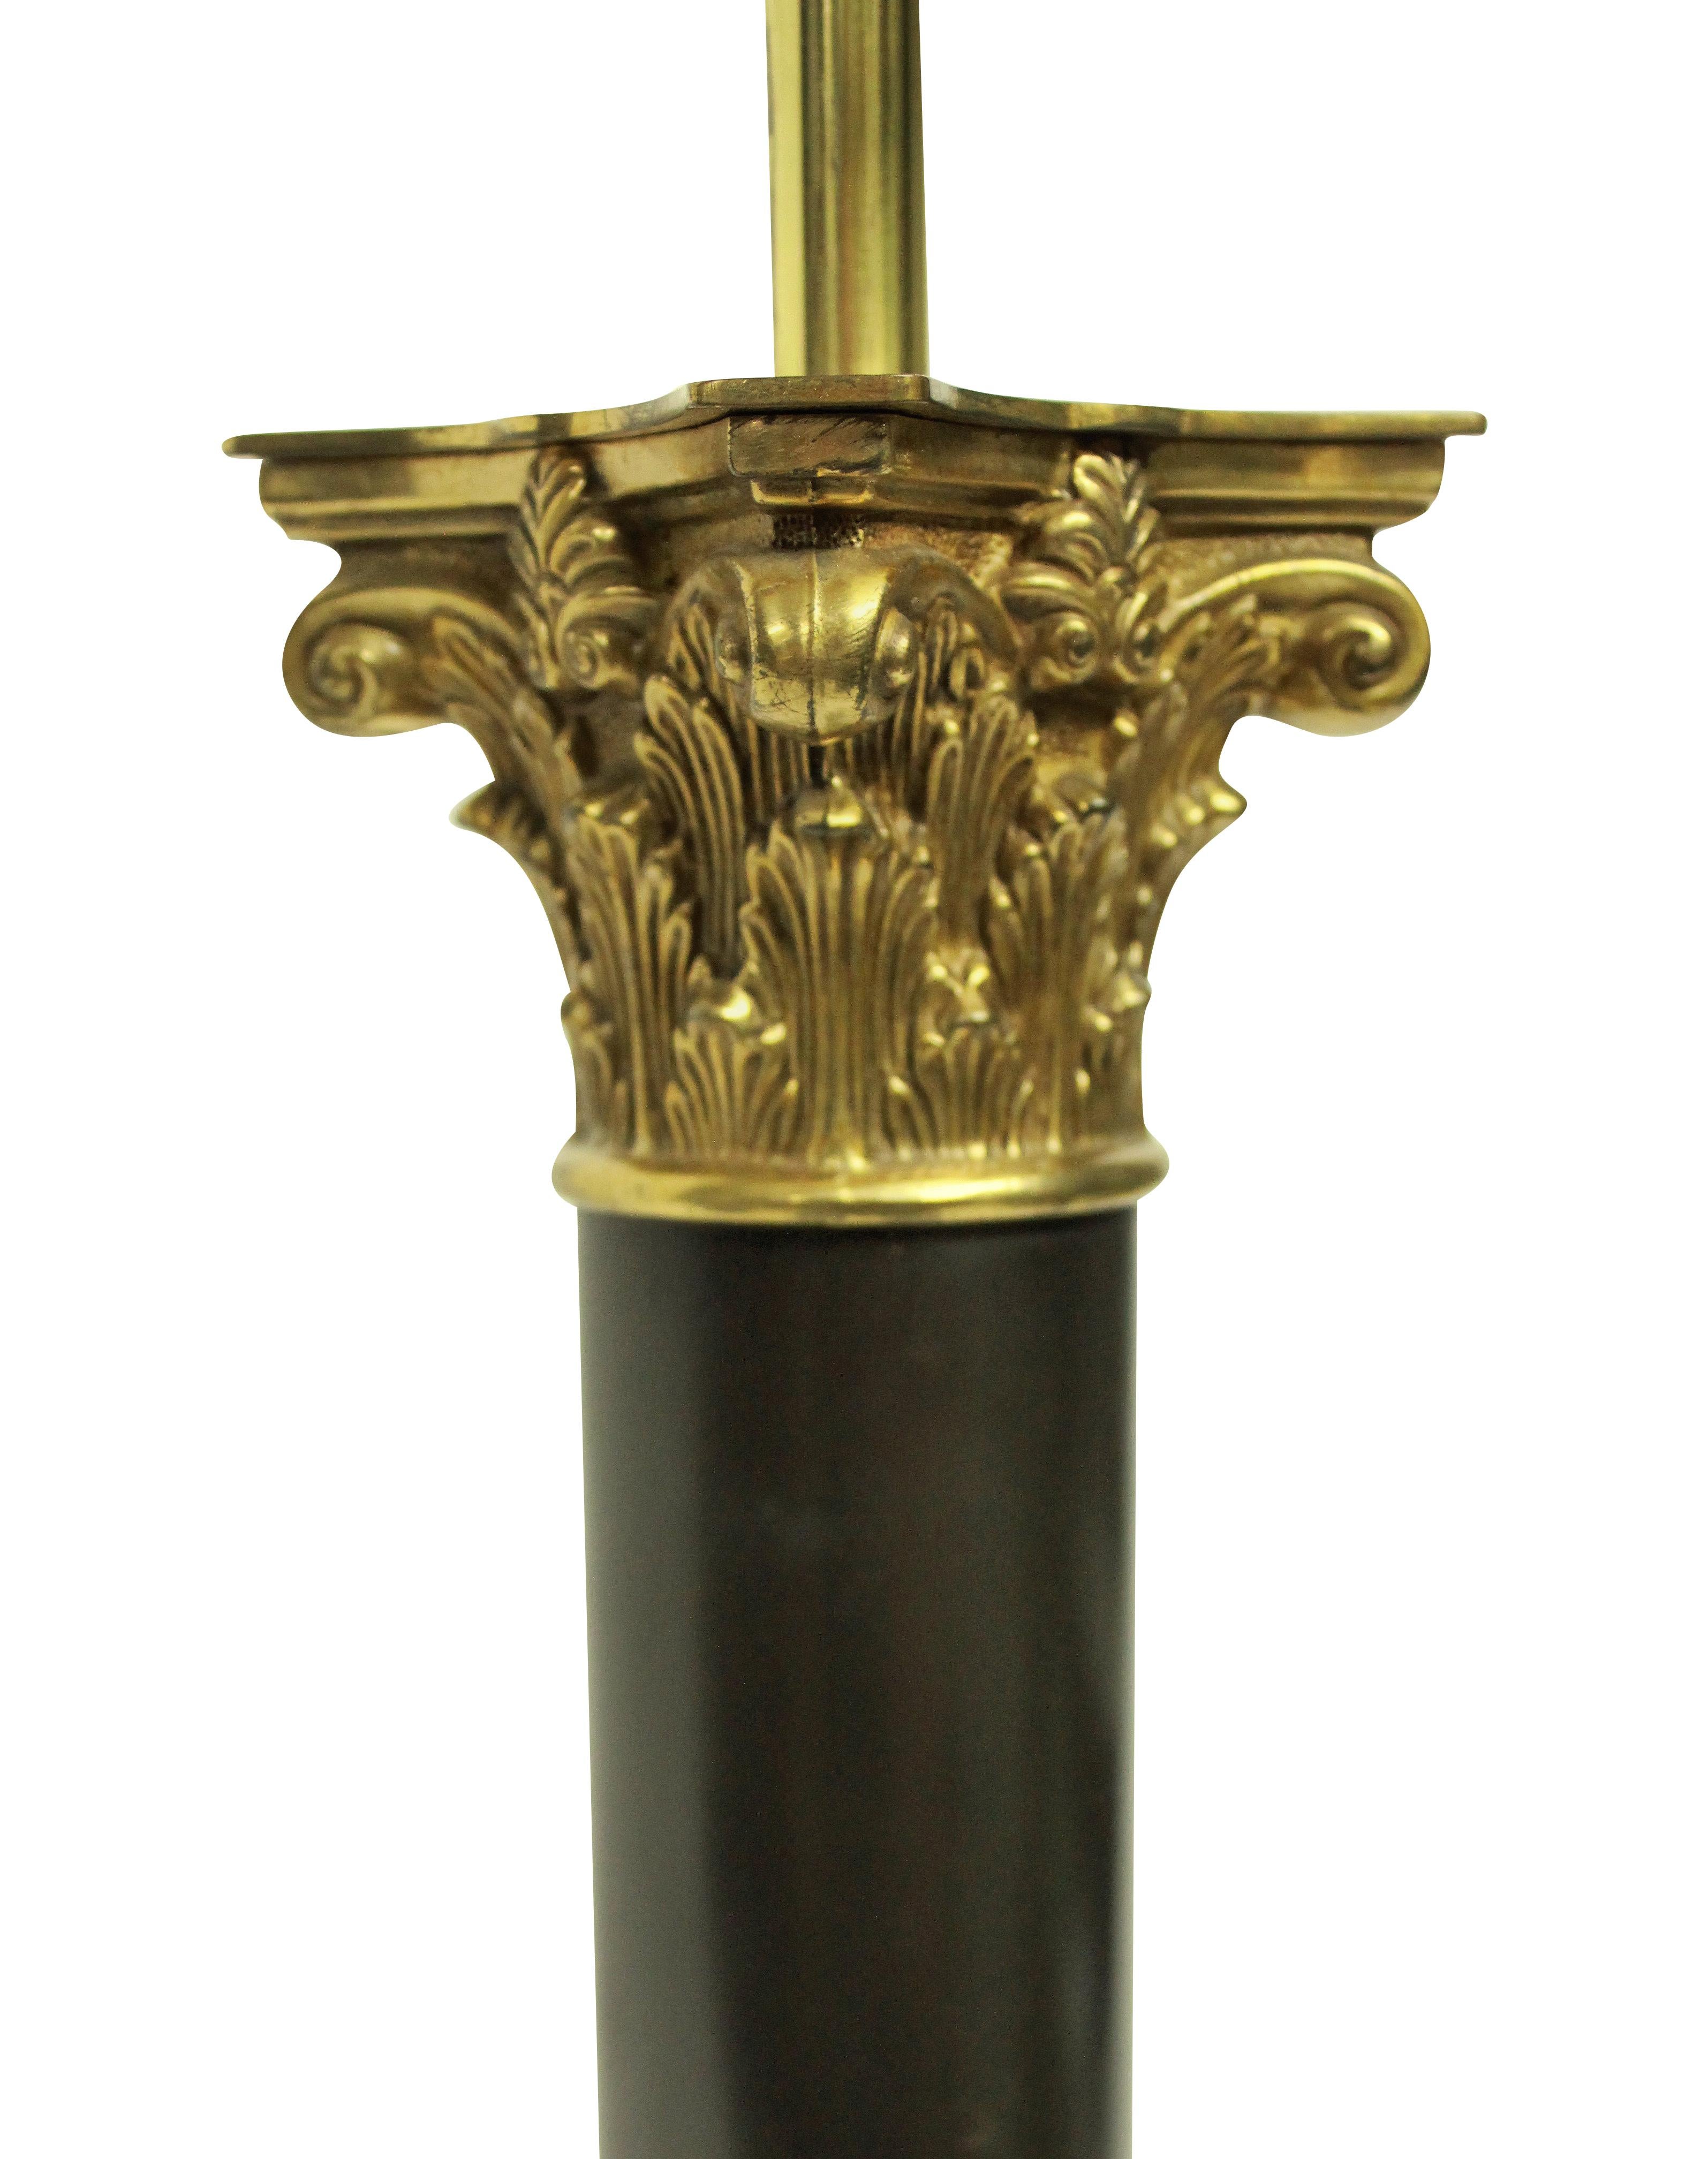 A large English bronze and ormolu column lamp in the Regency manner, made for 10 downing street, where several of these lamps can be found.